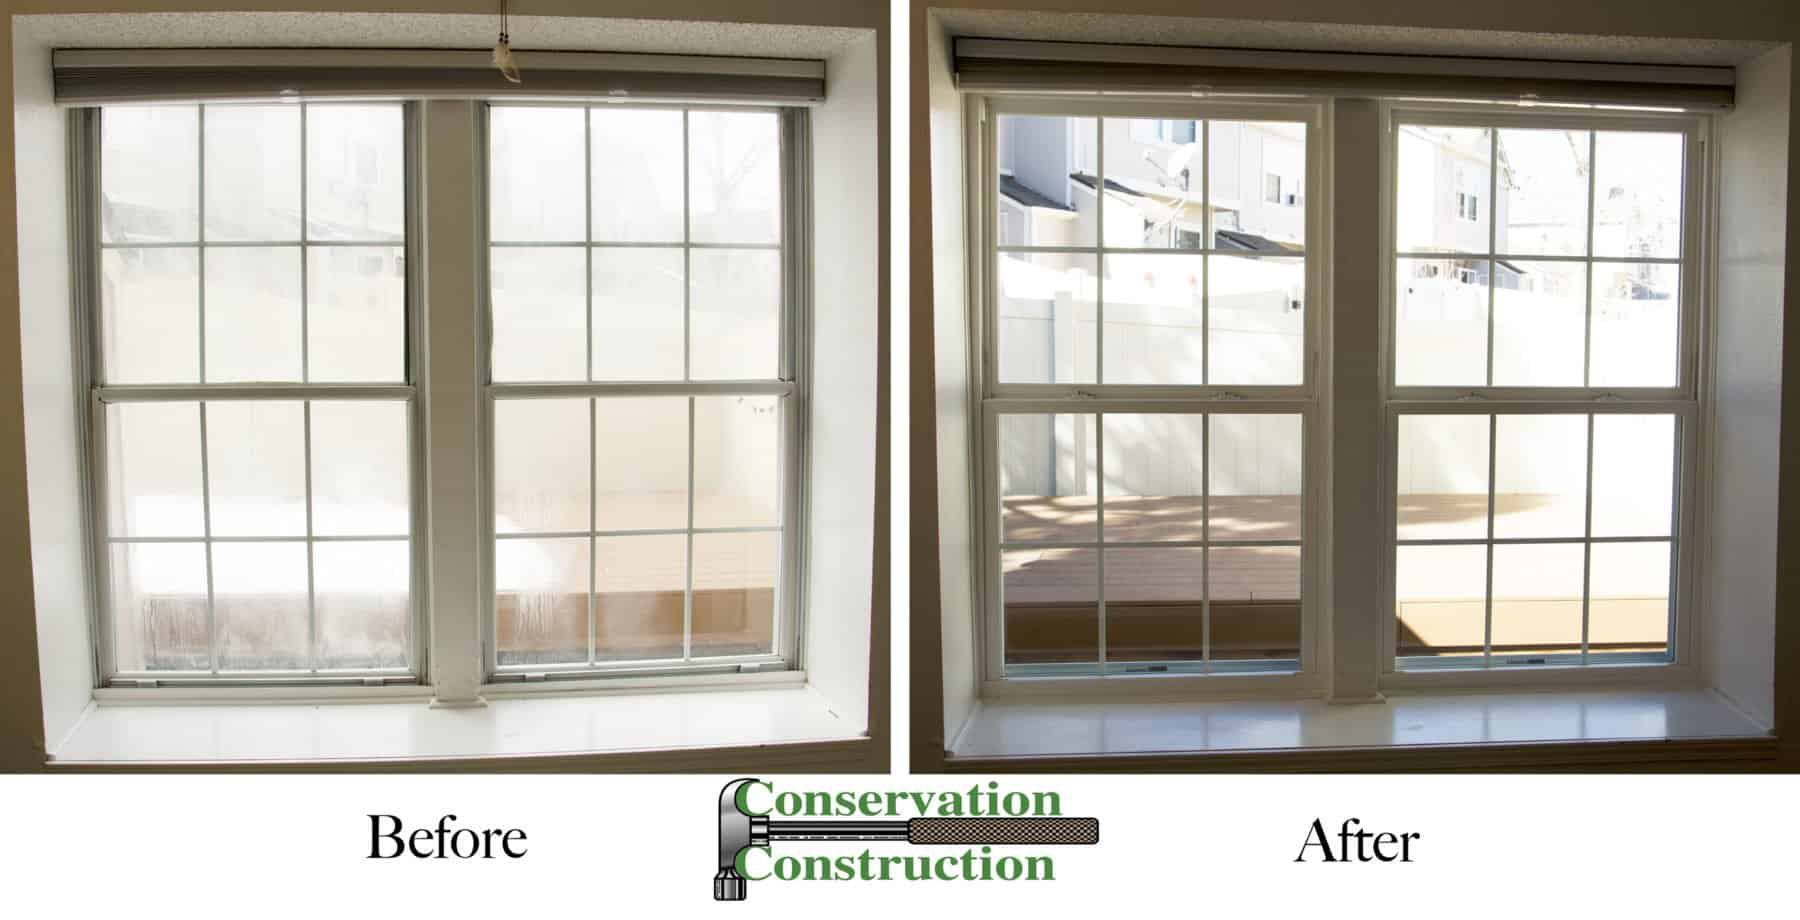 Before & After Windows, Conservation Construction, New Windows, Replacement Windows